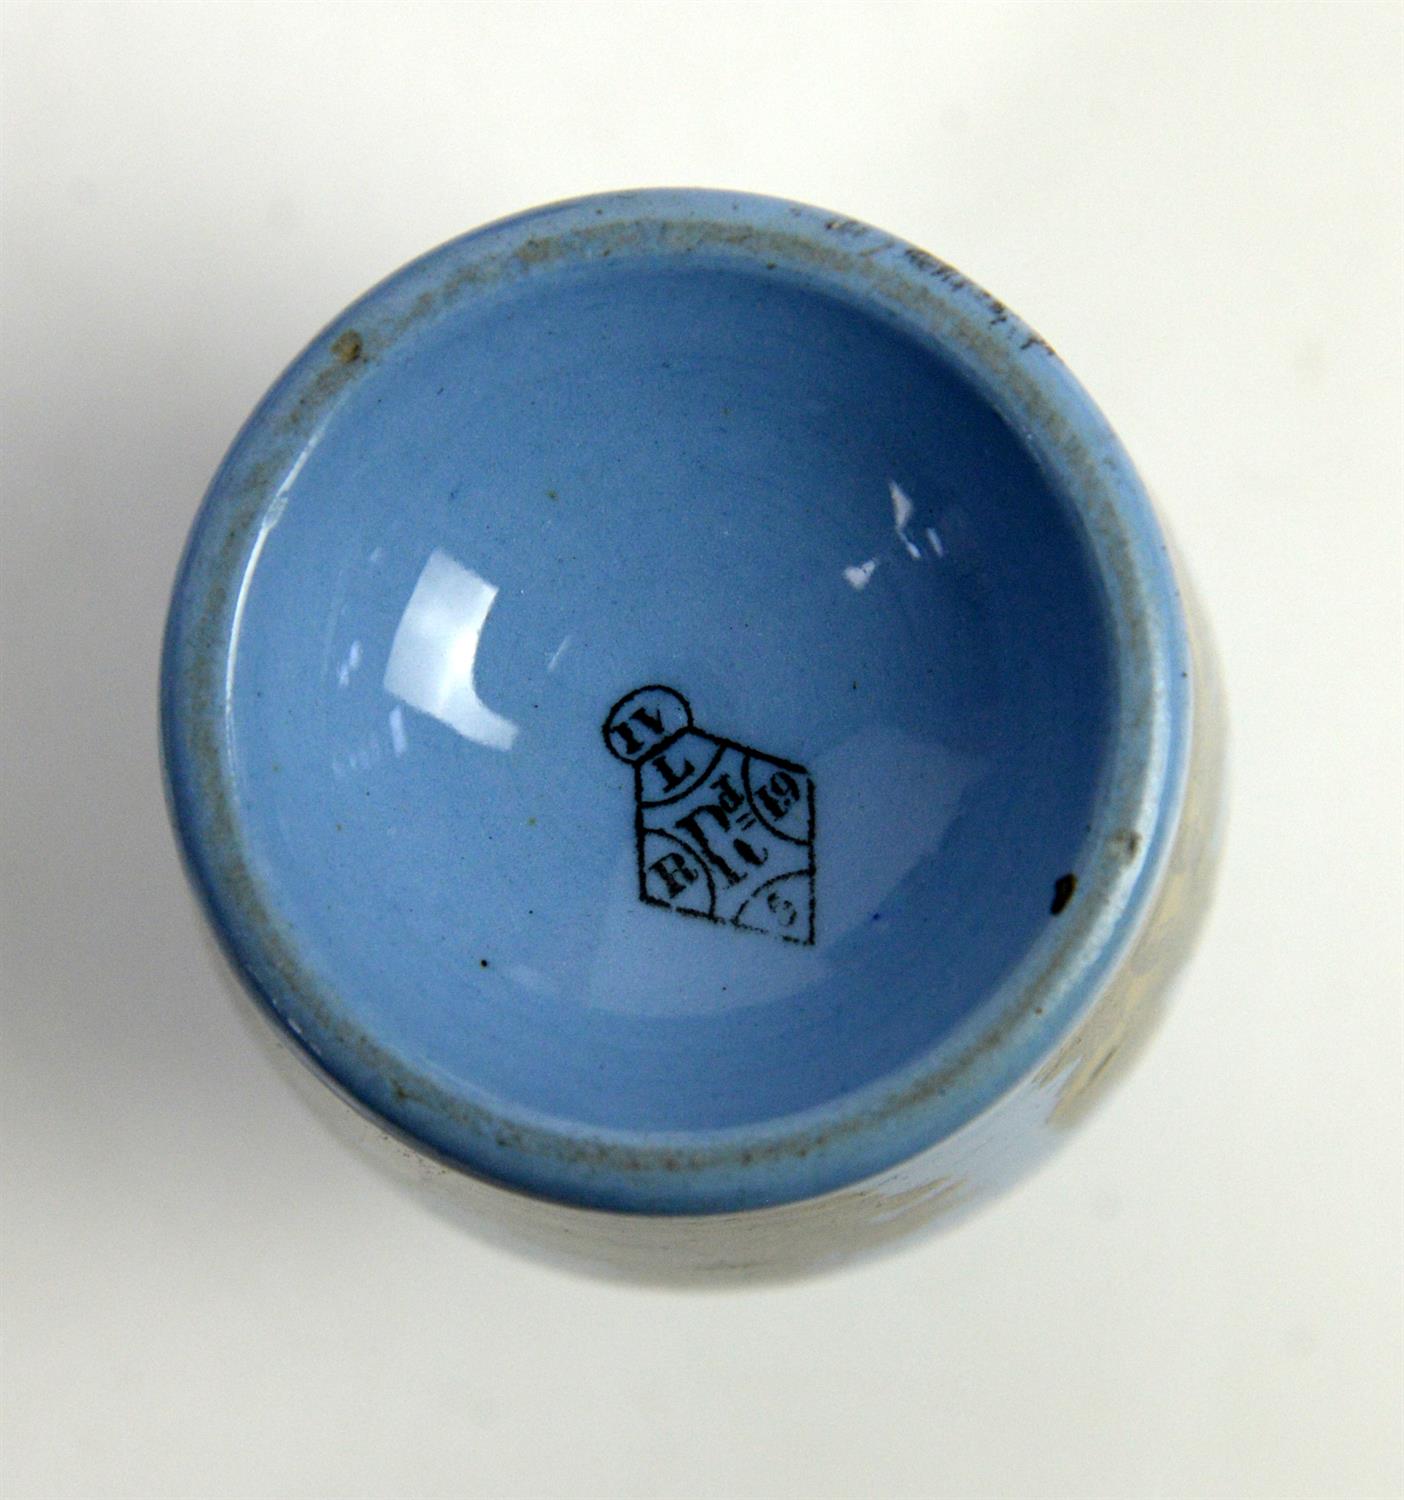 Collection of 19th Century Pratt-ware ceramic potted meat pots, jars (two with cover), - Image 6 of 6